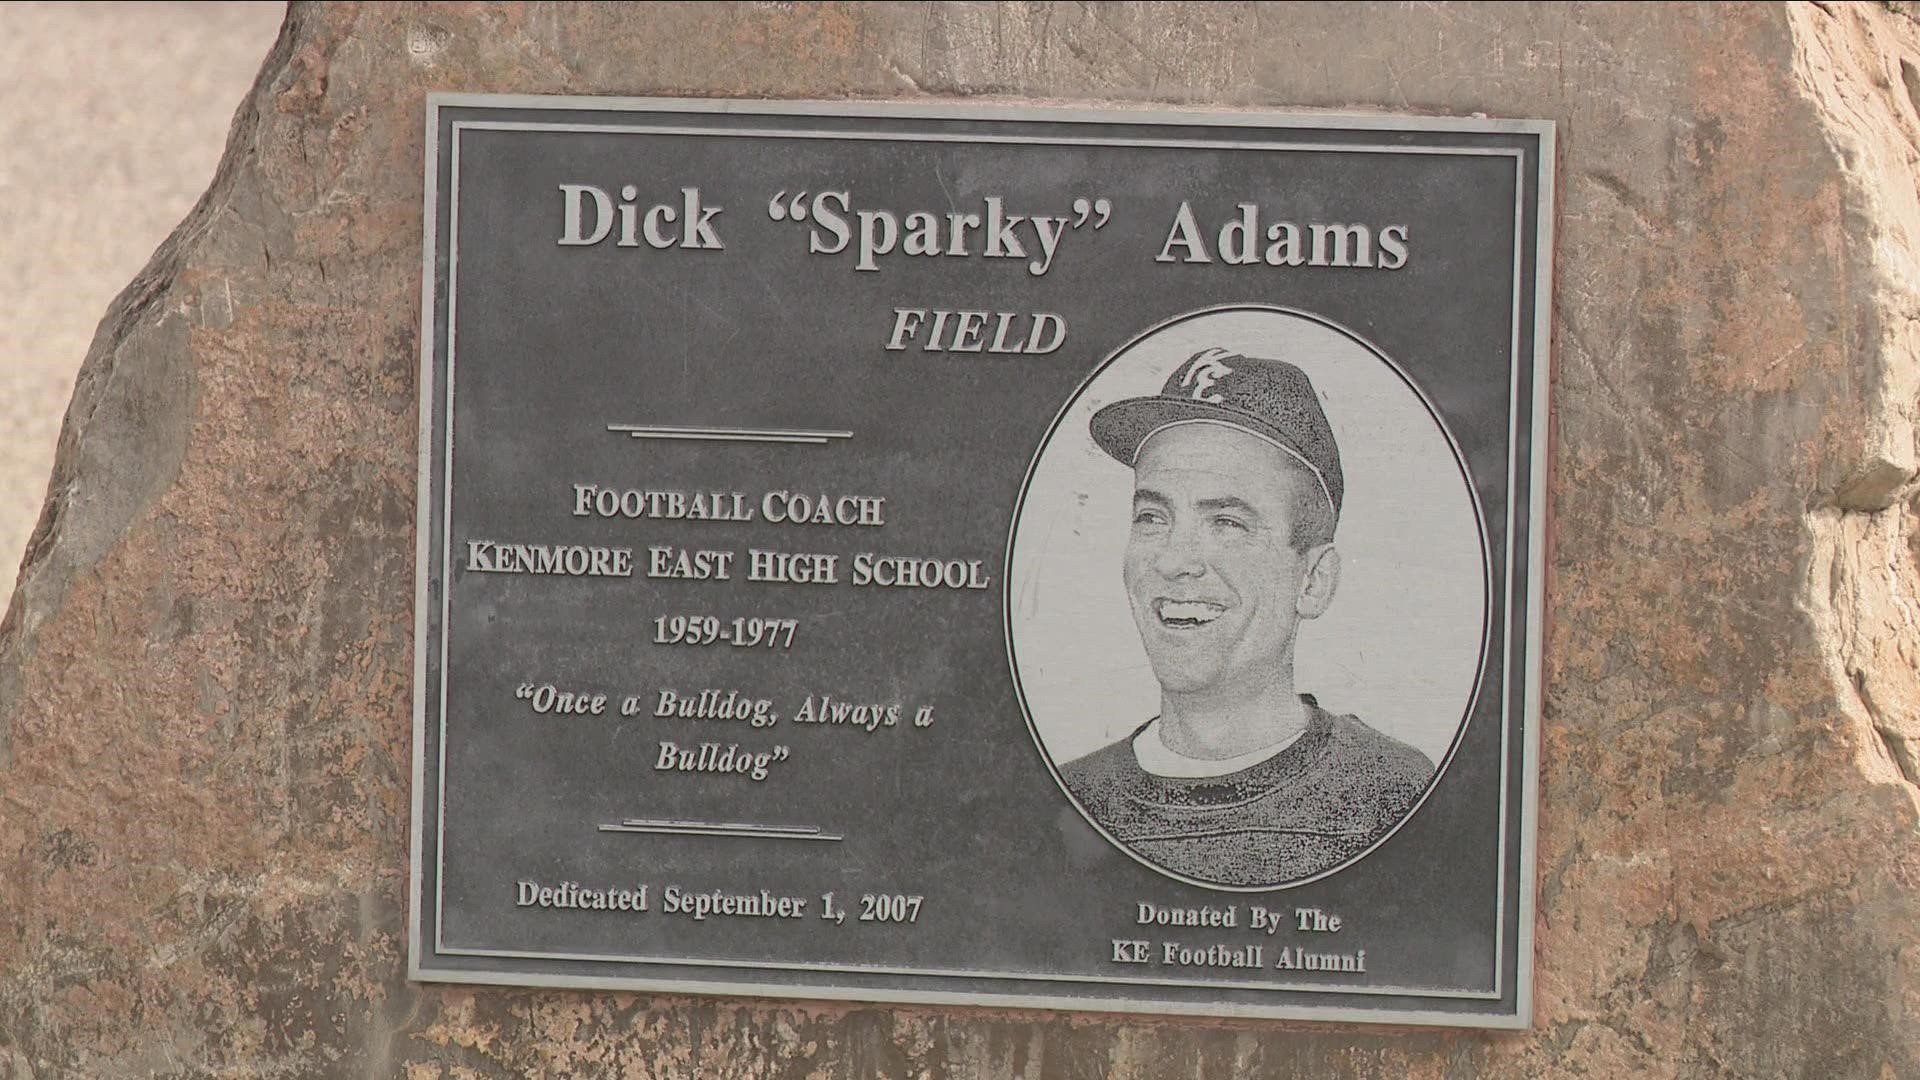 Adams was a longtime football coach for programs such as Buffalo State, the University at Buffalo, Canisius College, and Kenmore East High School.